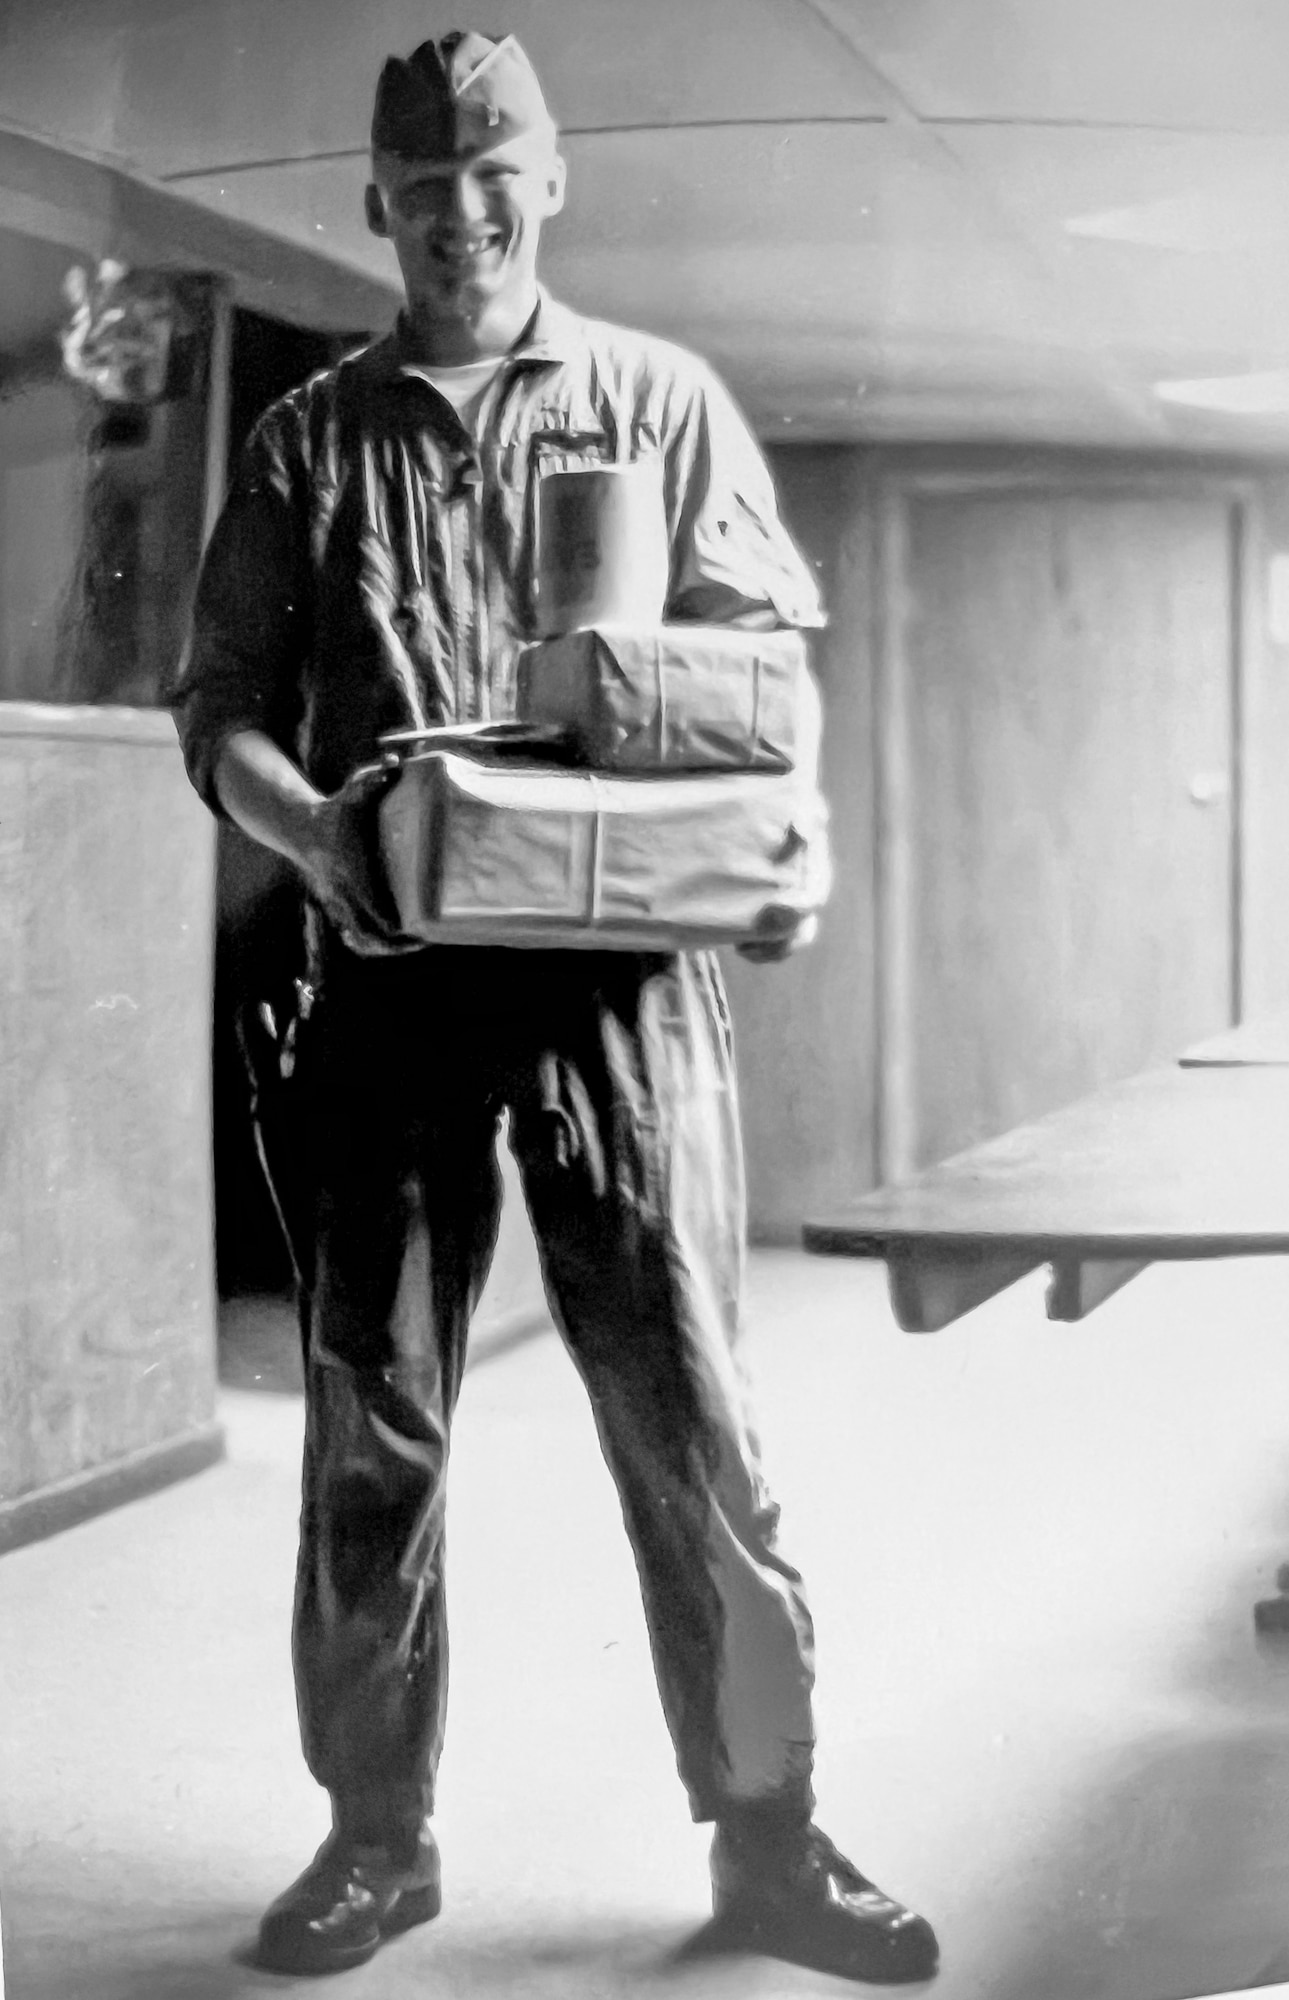 Retired Brig. Gen. Kenneth J. Stromquist, poses for a photo after receiving mail as a Lieutenant, while stationed at the 19th Tactical Air Support Squadron (TASS) on Tan Son Nhut Airbase, III Corps, South Vietnam in 1970.